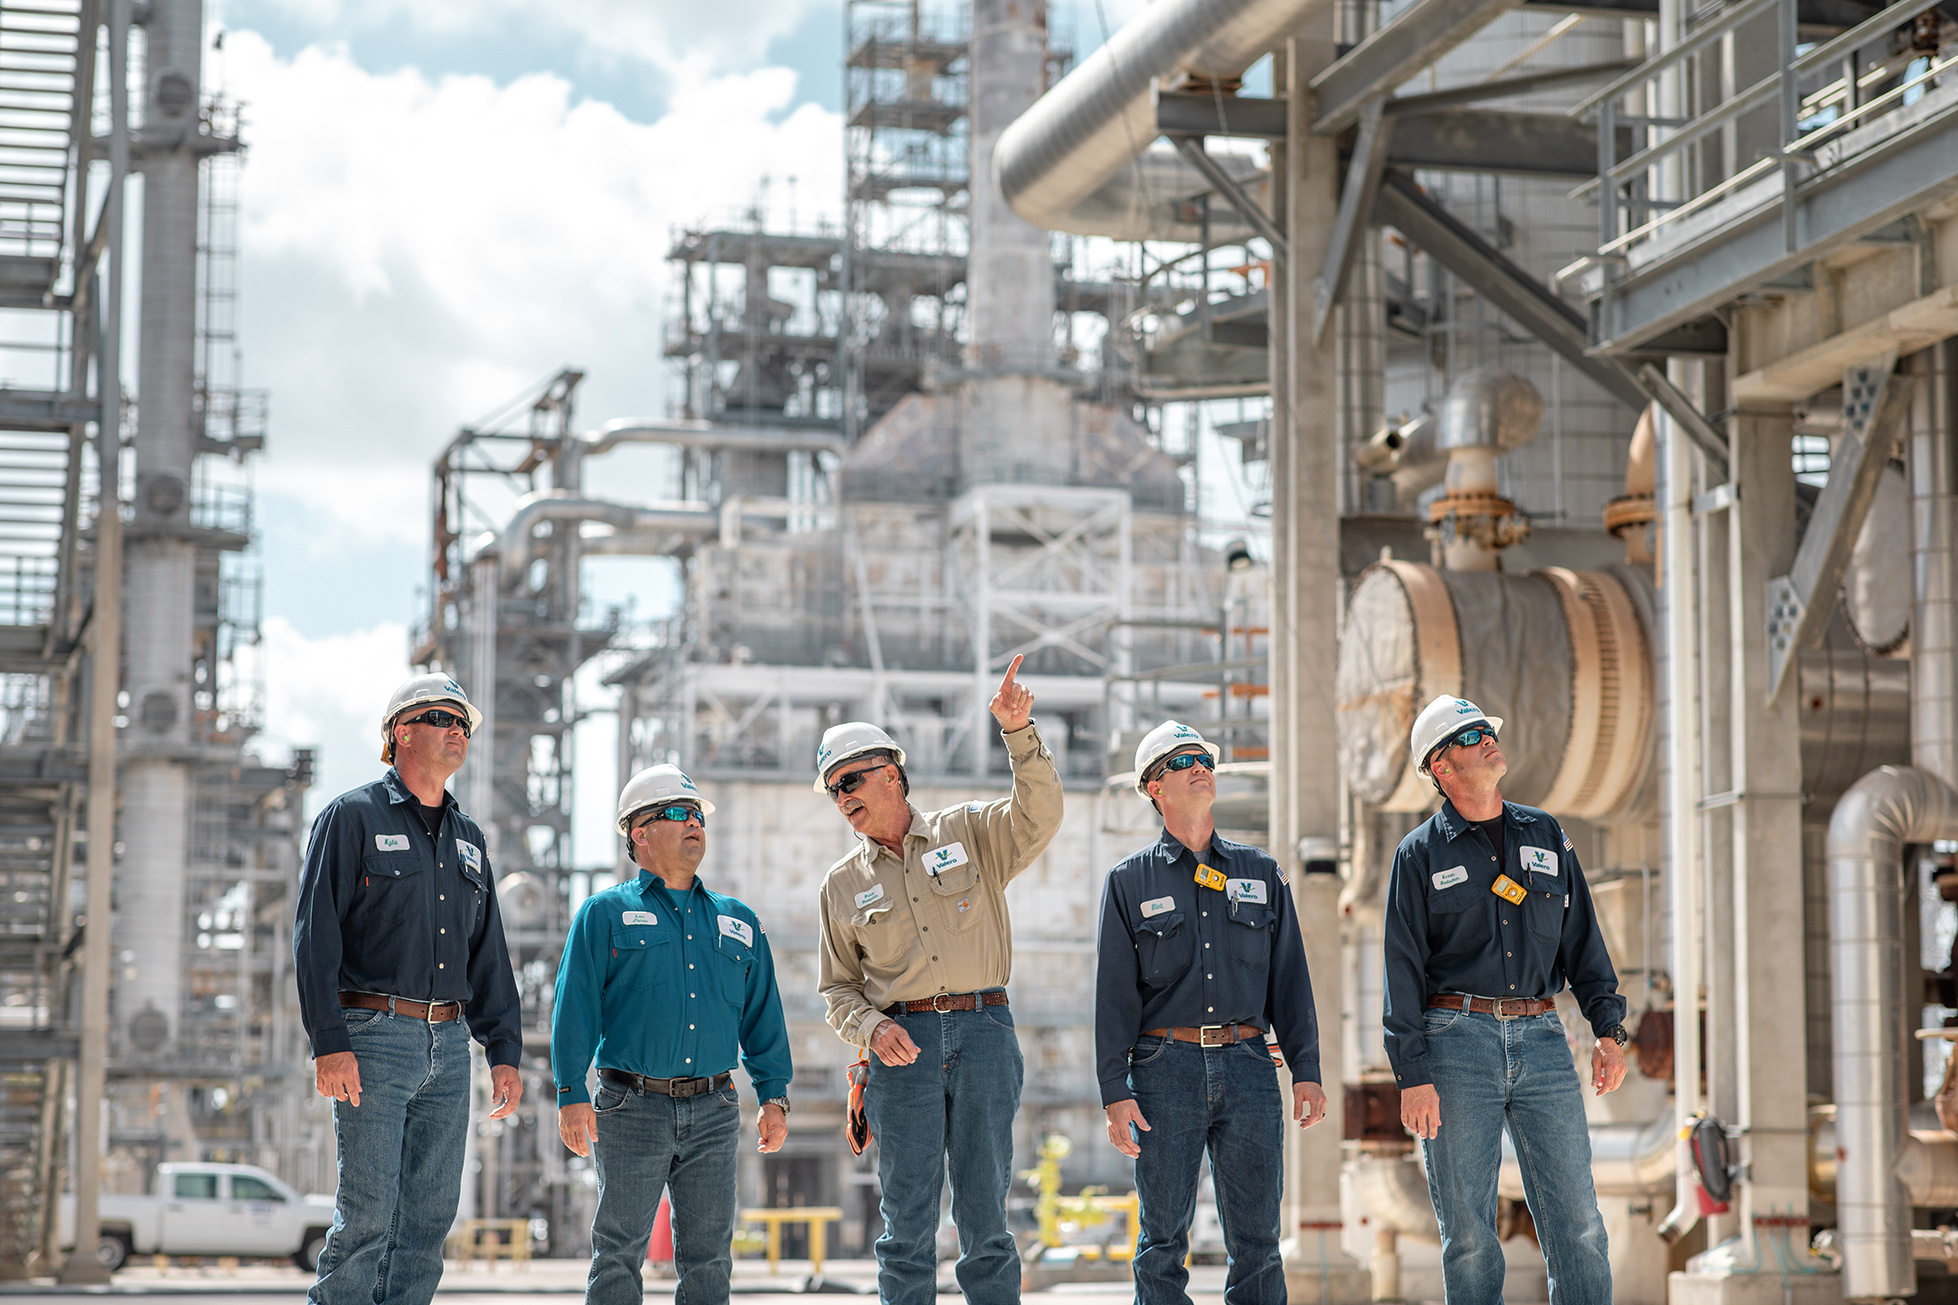 Employees at the Corpus Refinery